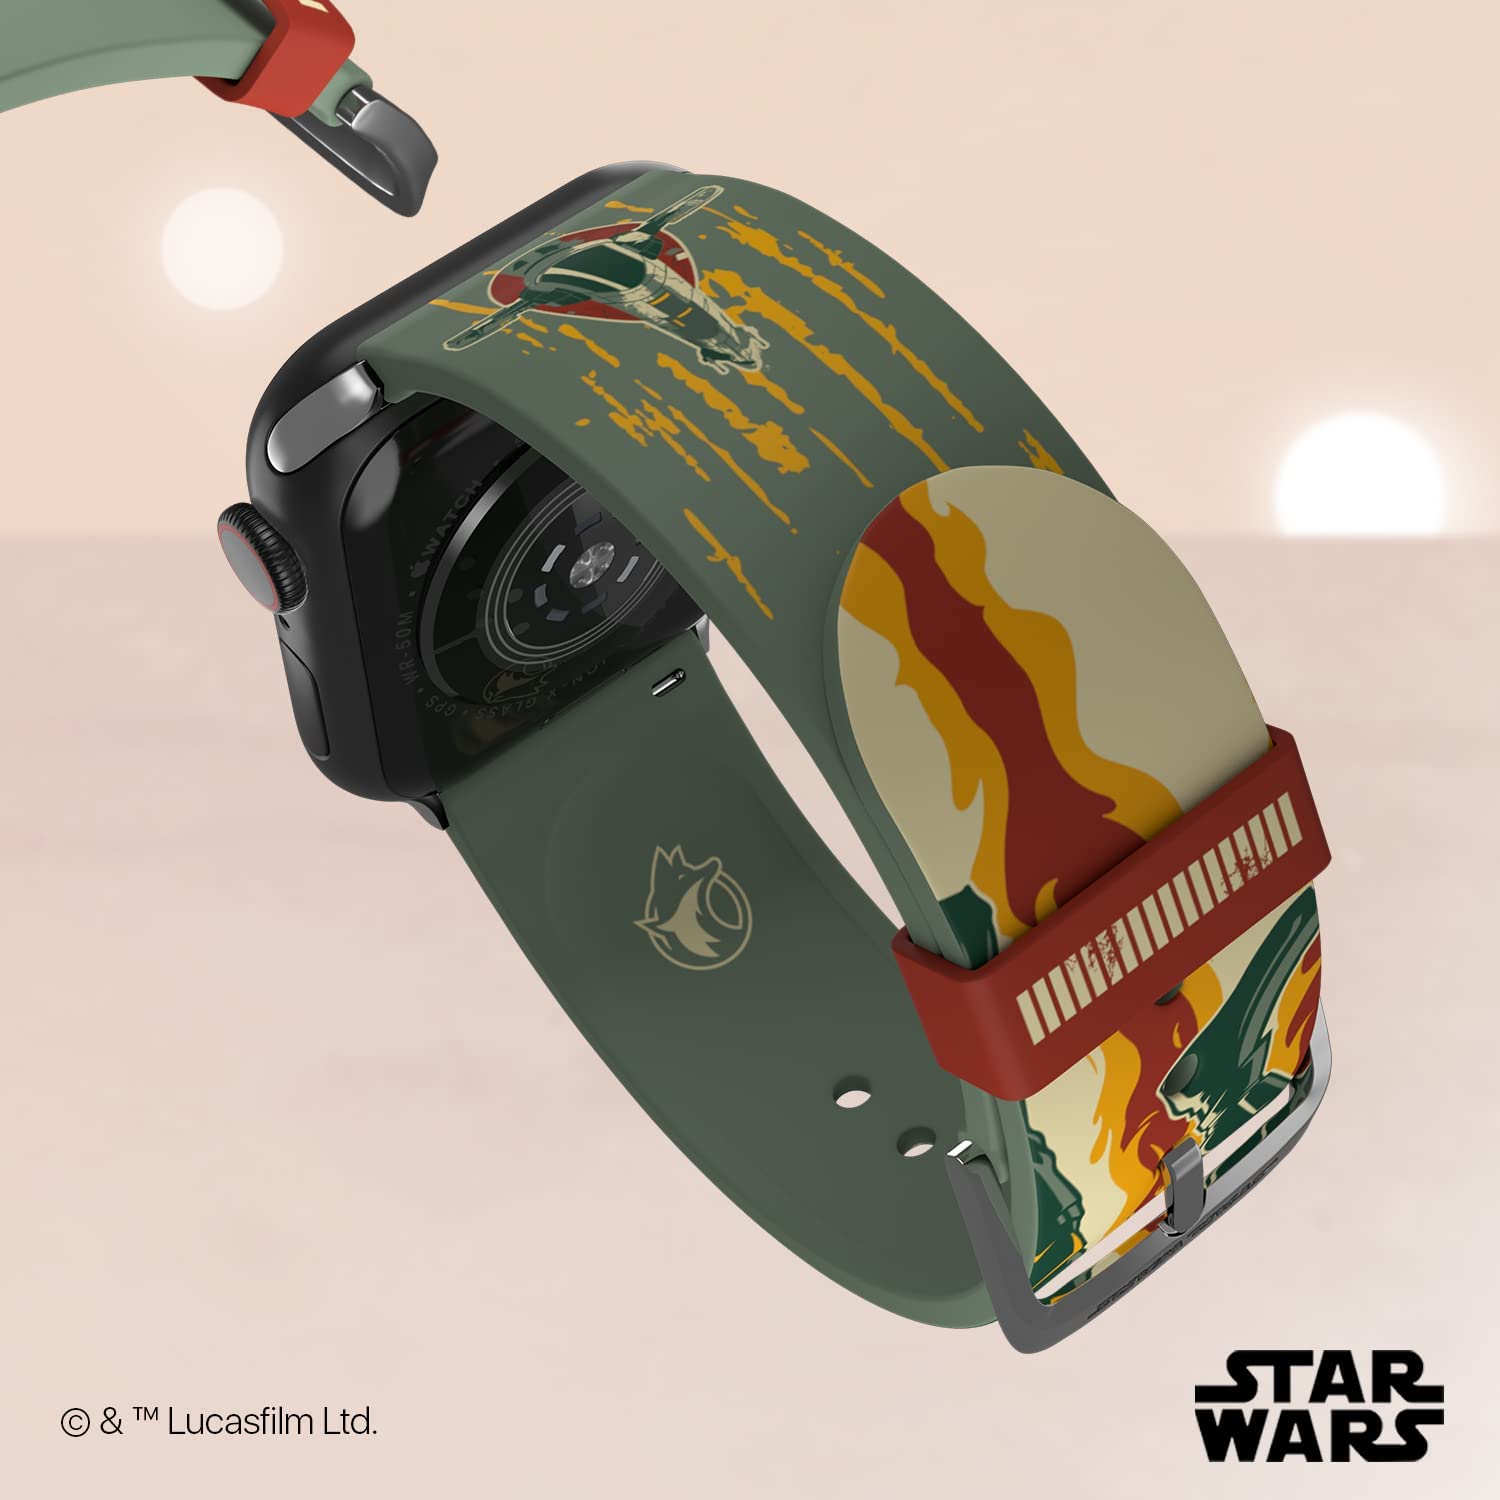 Star Wars: Boba Fett Smartwatch Band – Officially Licensed, Compatible with Every Size & Series of Apple Watch (watch not included)